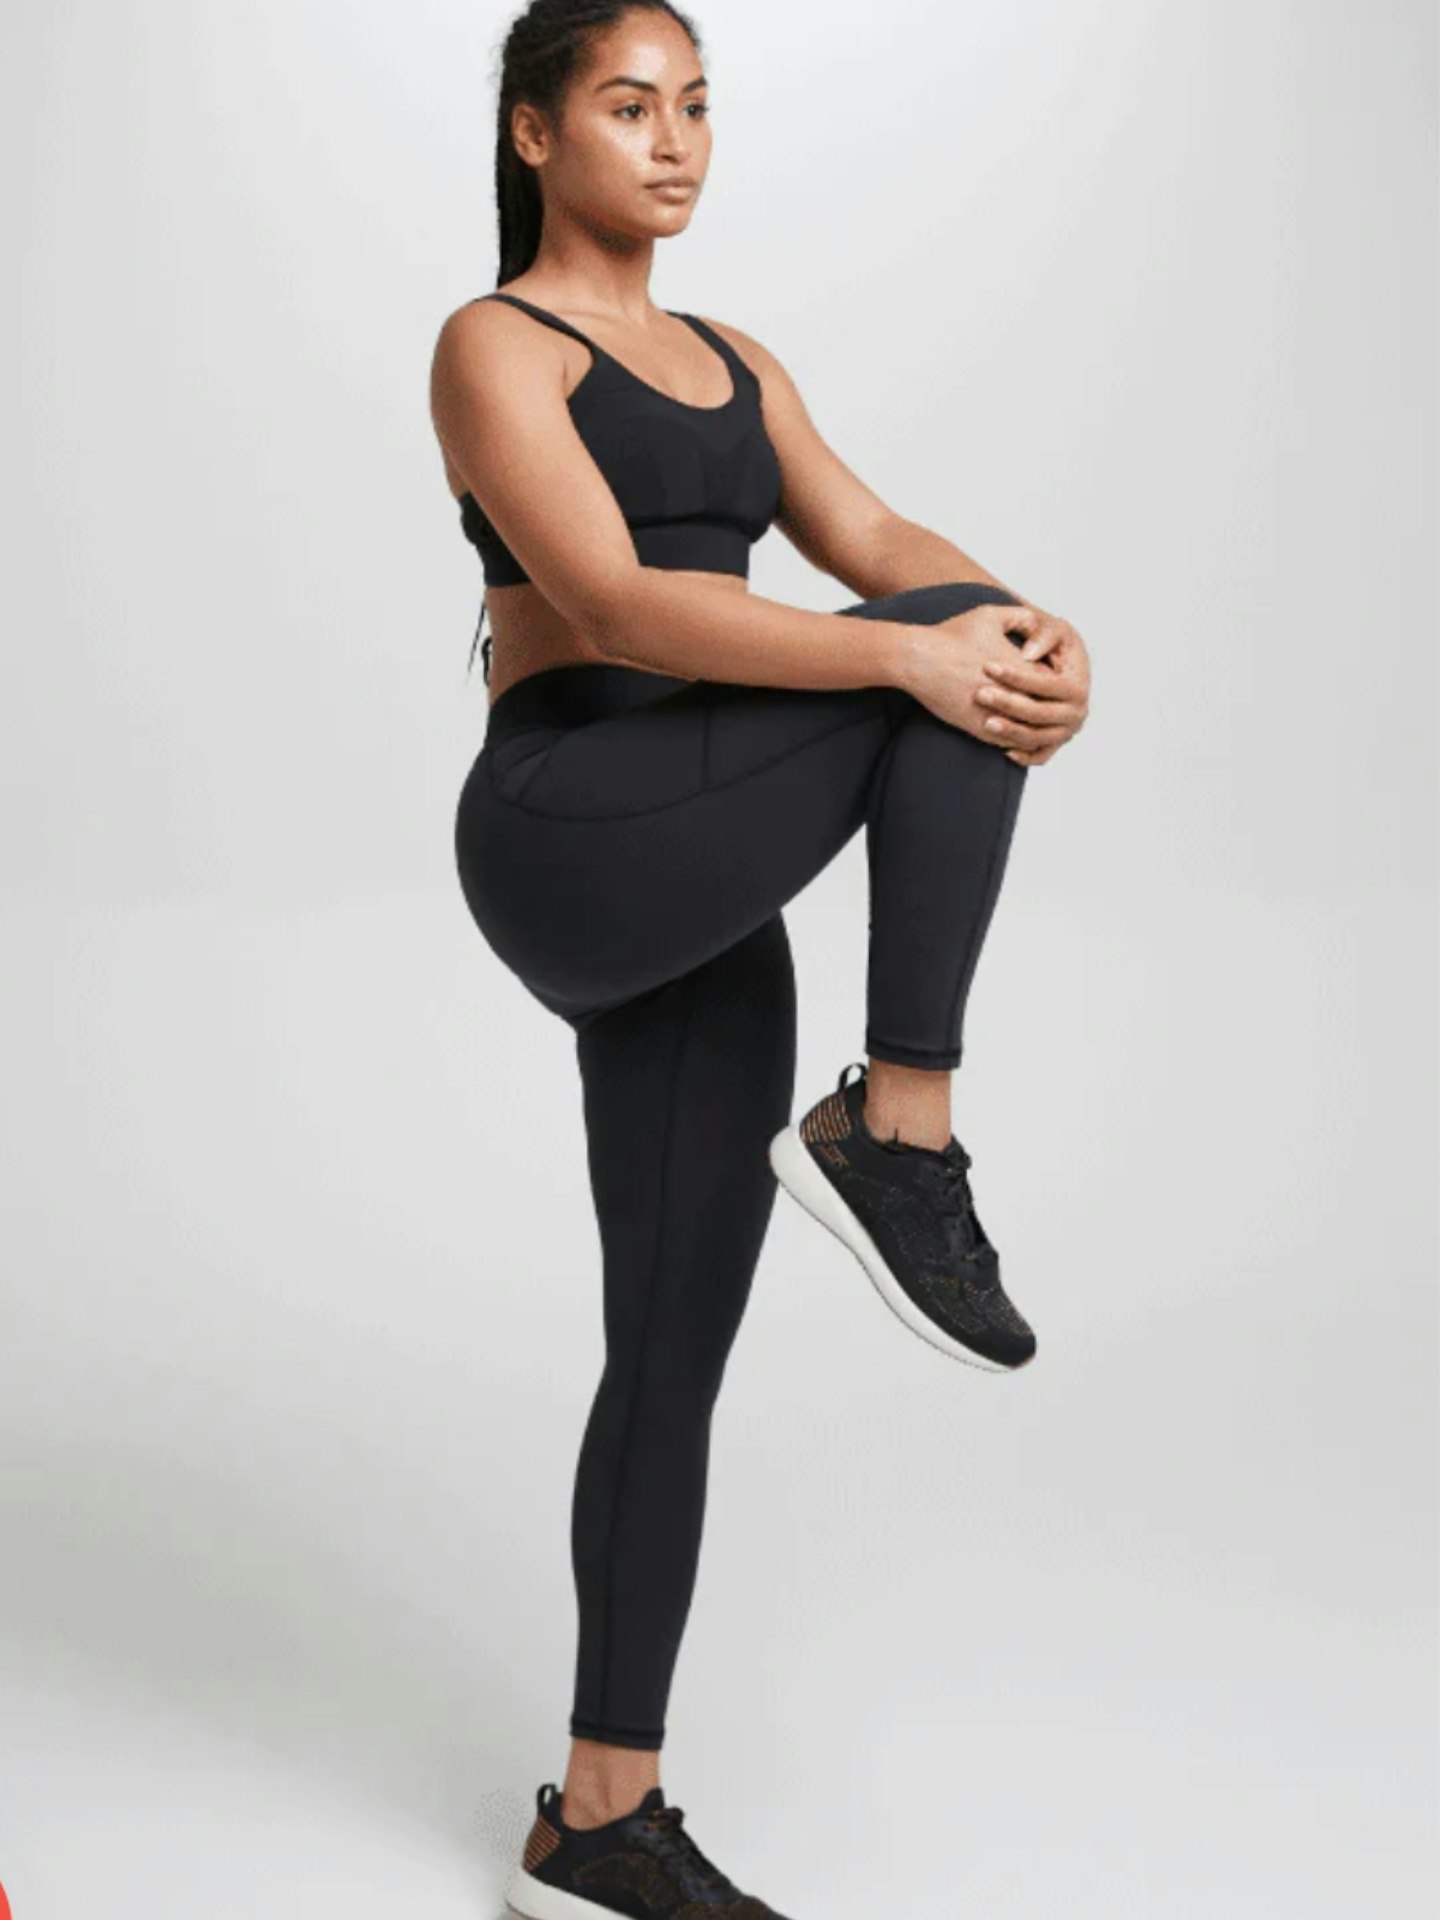 Modibodi Period And Leak-Proof Leggings Are Here To Ease Your